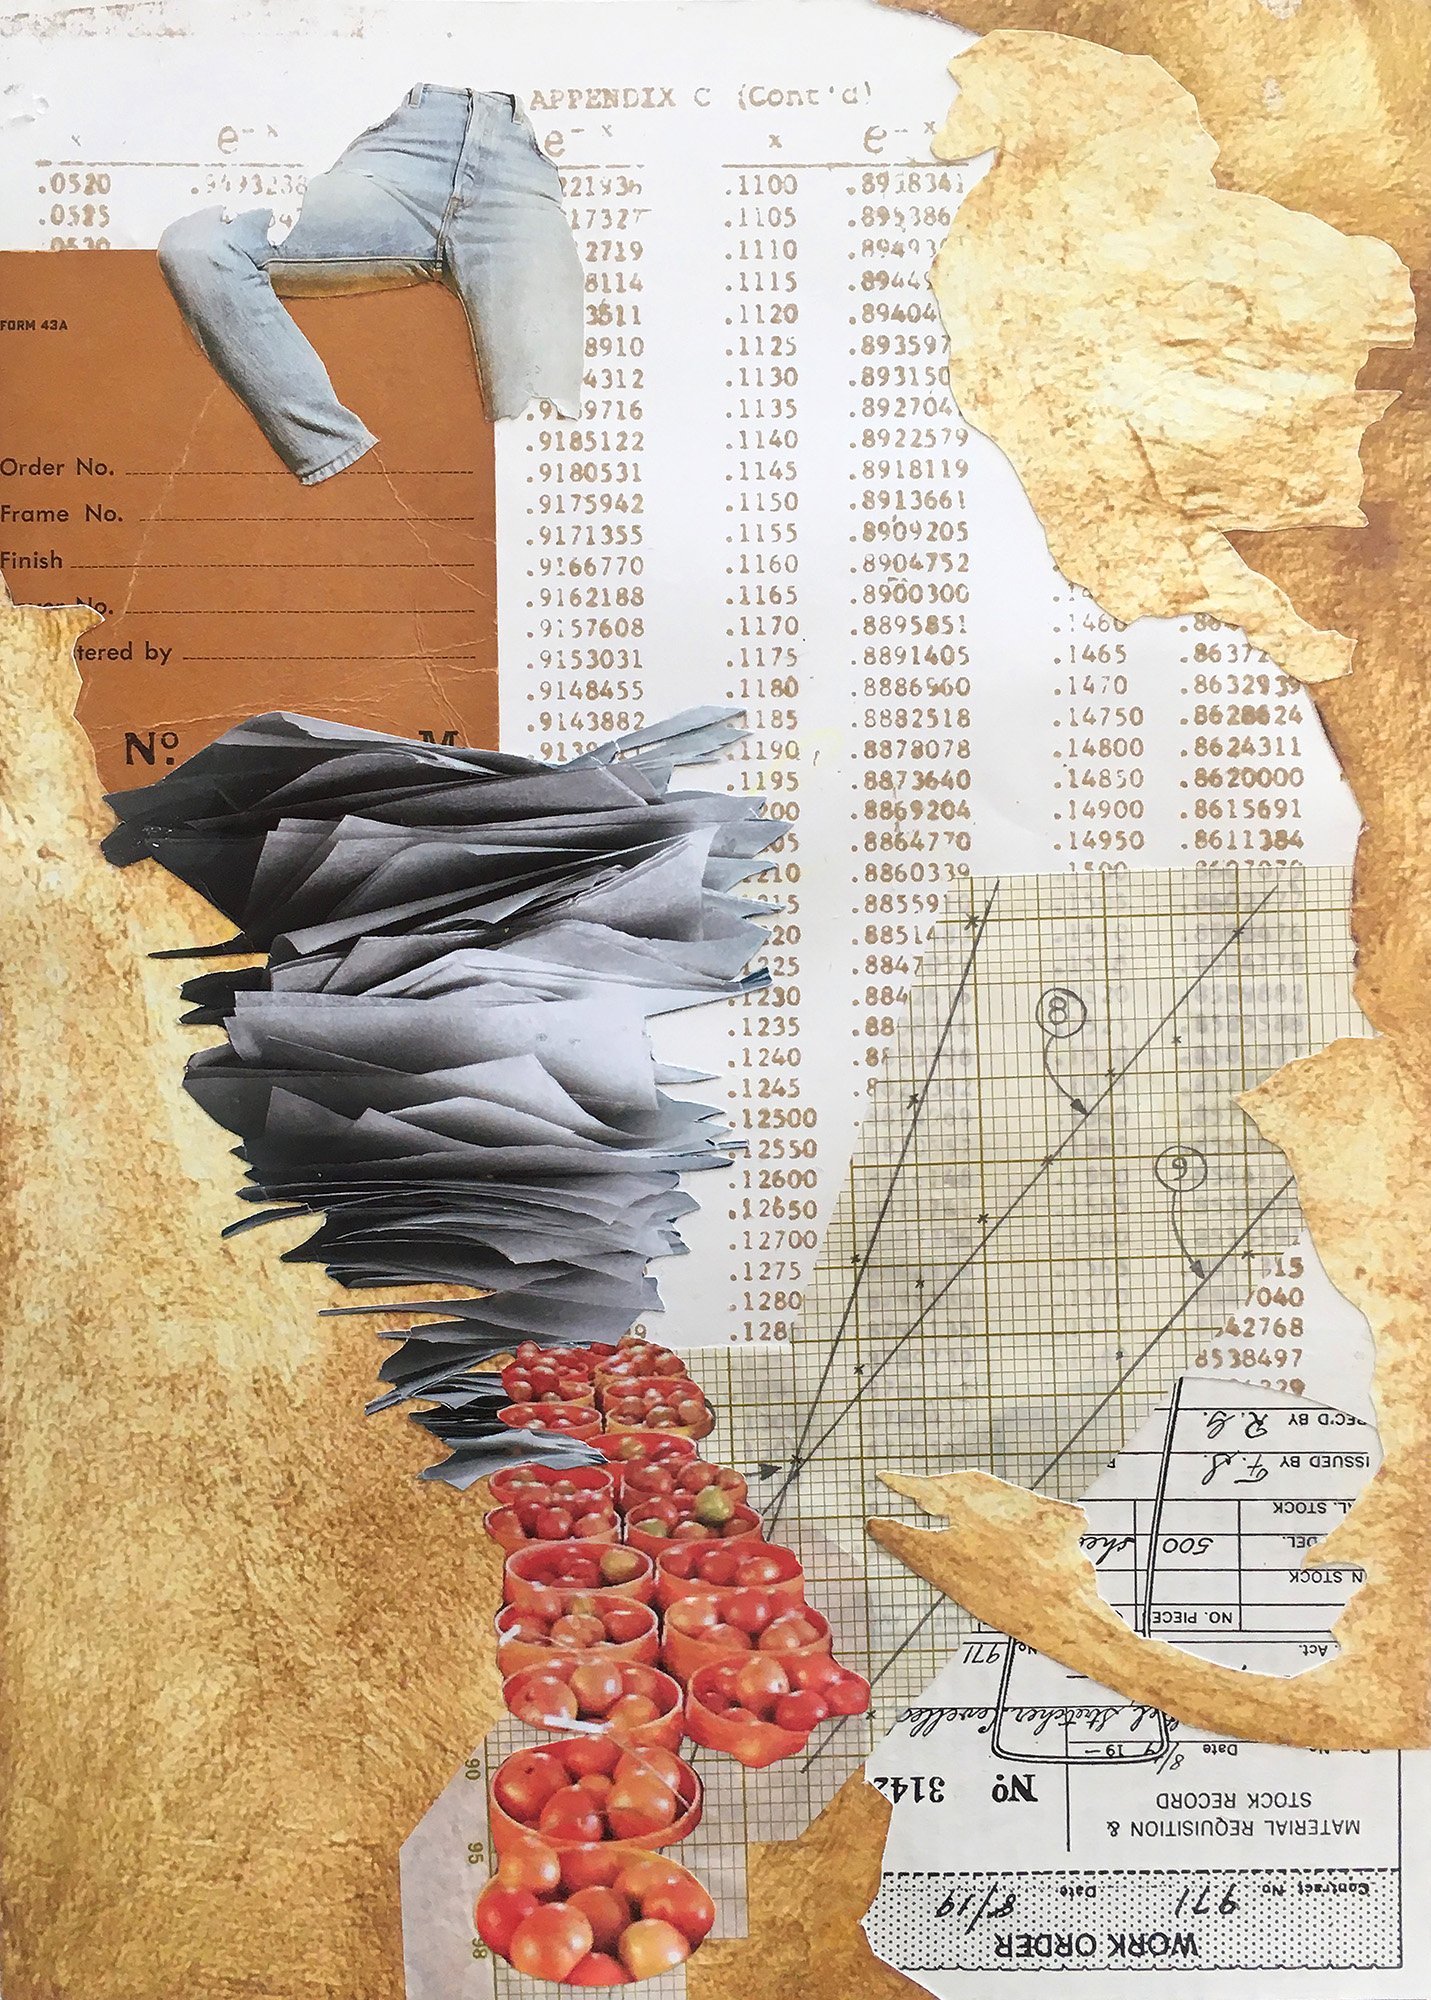    Aspiration    Mixed media collage on engineering coursework, 16 x 12 inches 